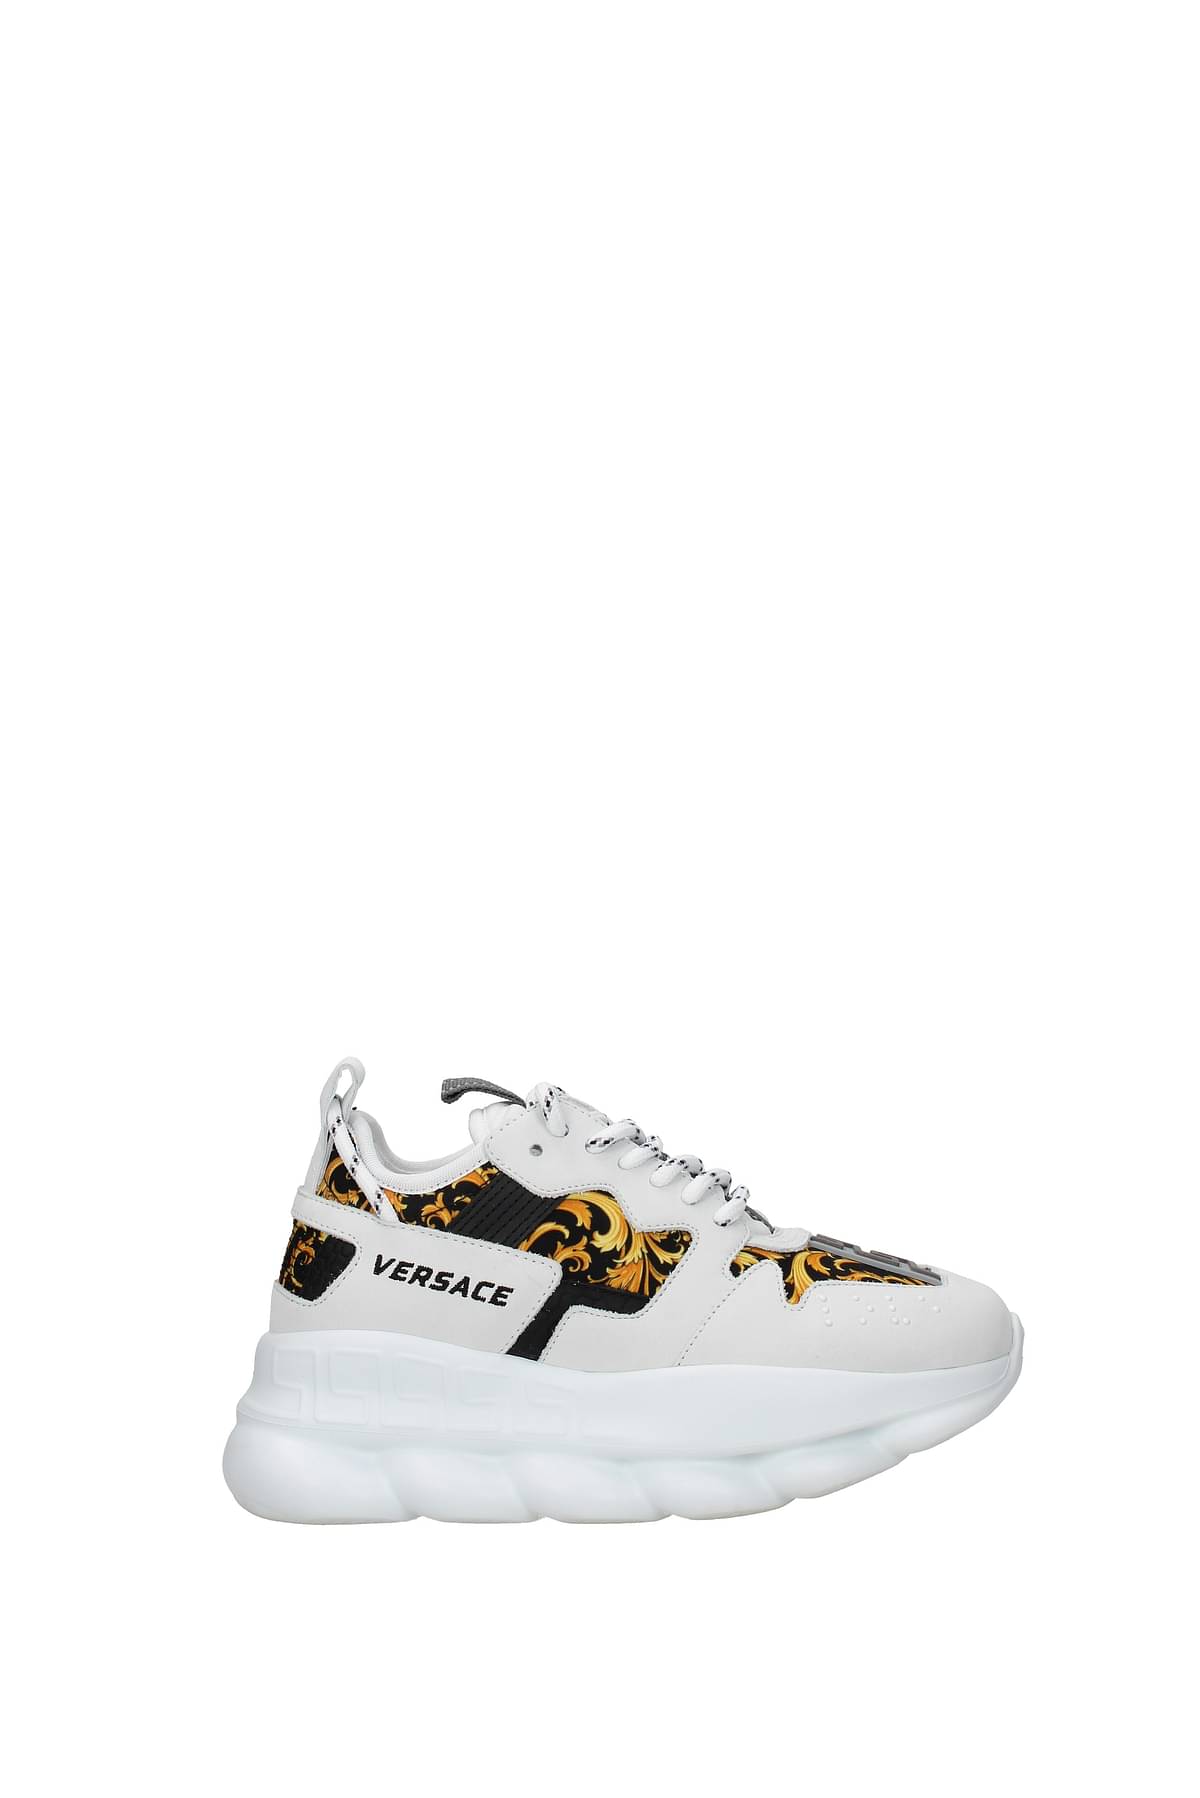 Versace Sneakers chain reaction 2 Women DST030GDT21DBN9 Suede White 680€